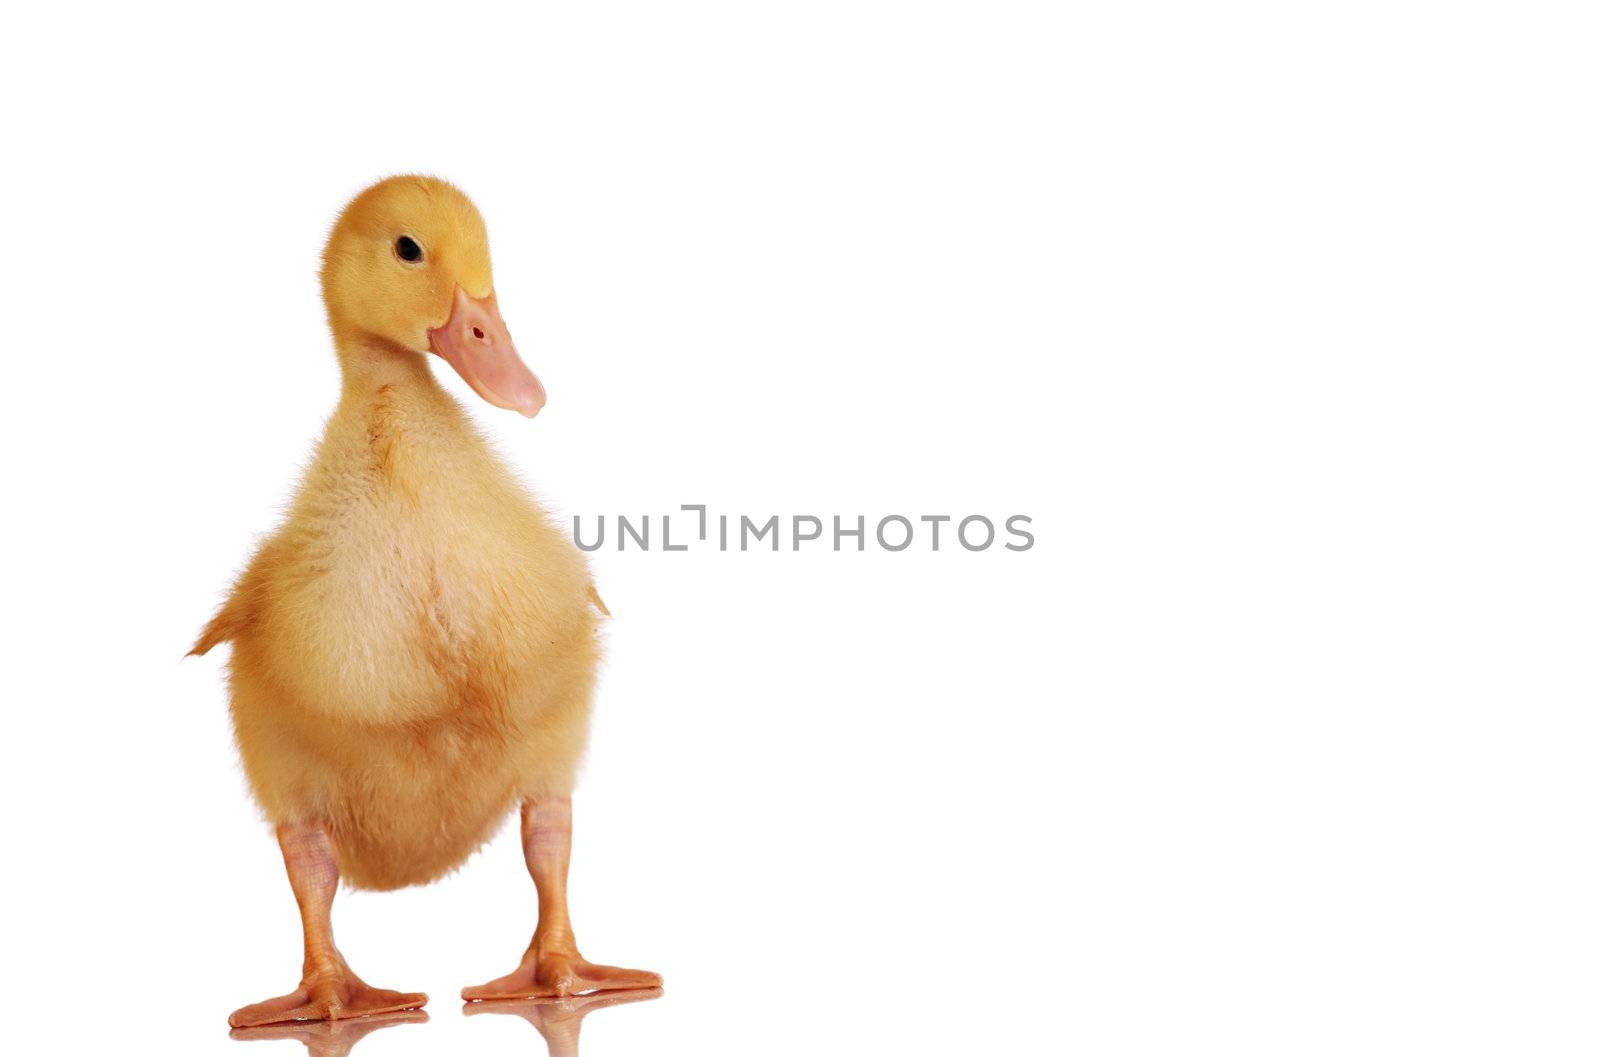 One young yellow duckling by jarenwicklund